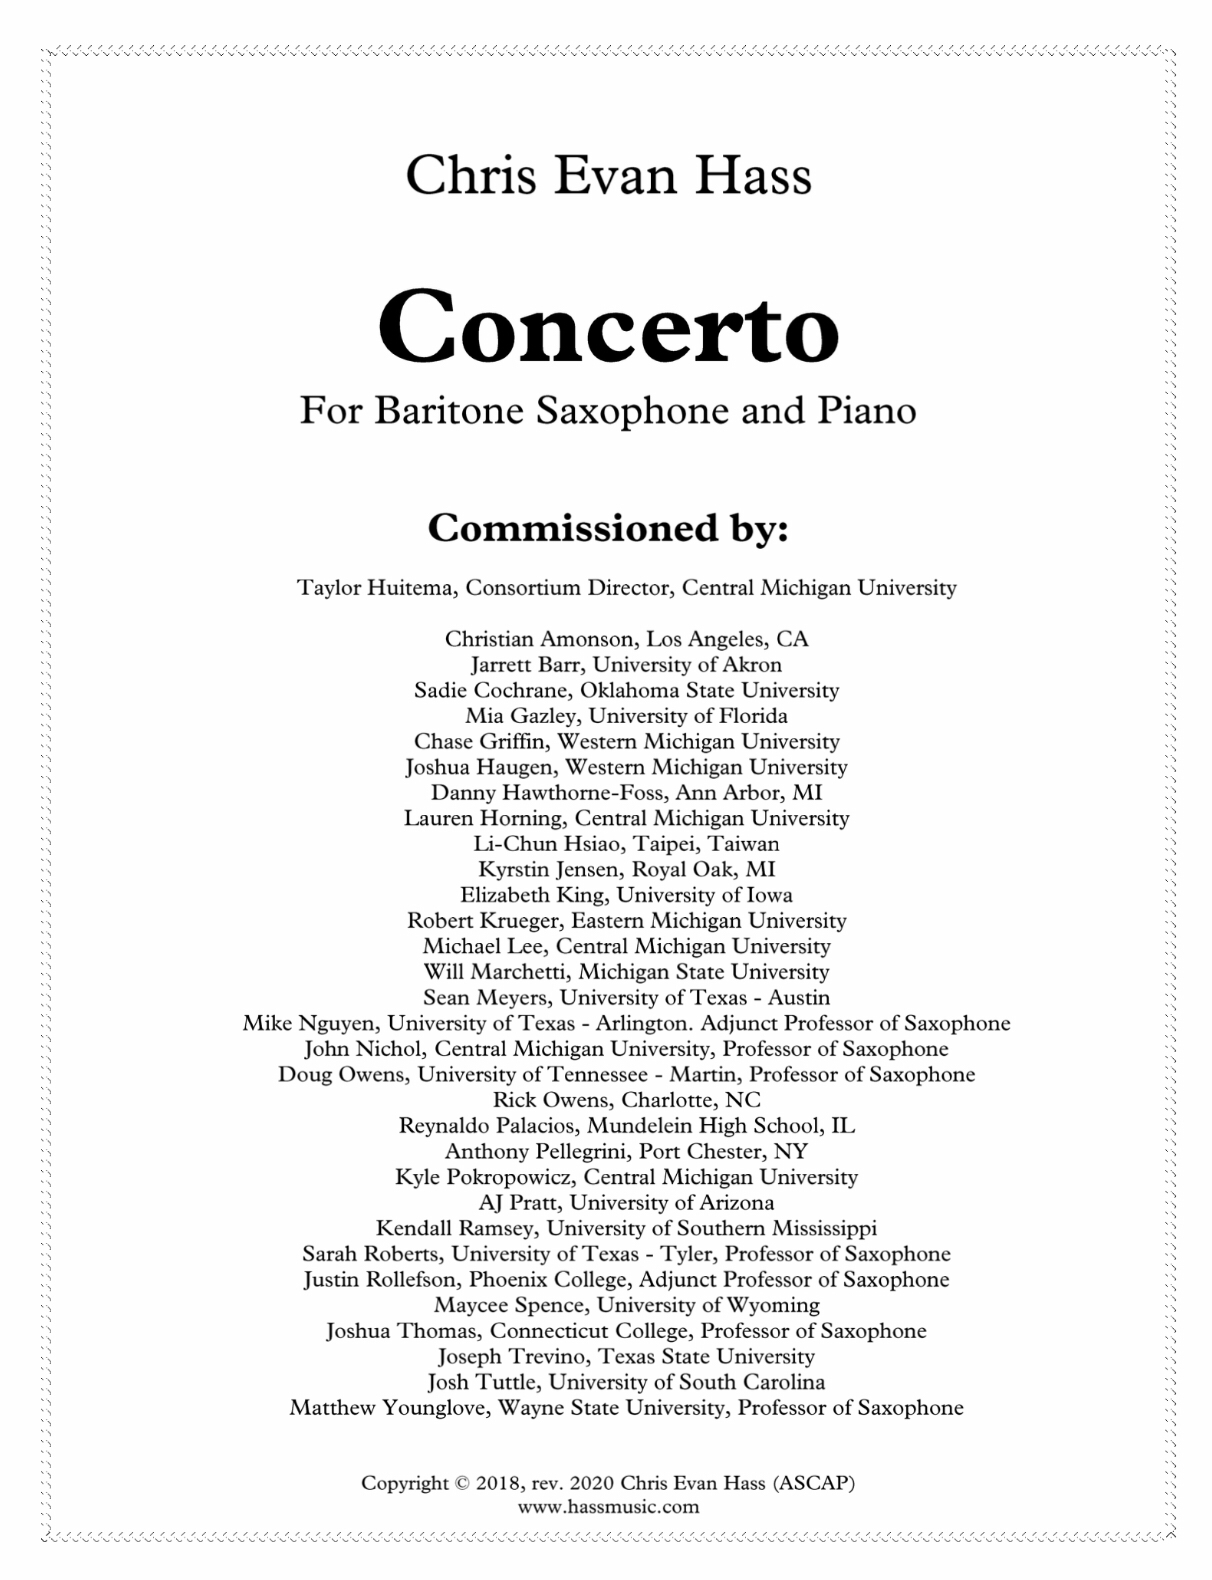 Concerto For Baritone Saxophone And String Orchestra (Piano Reduction) by Chris Evan Hass